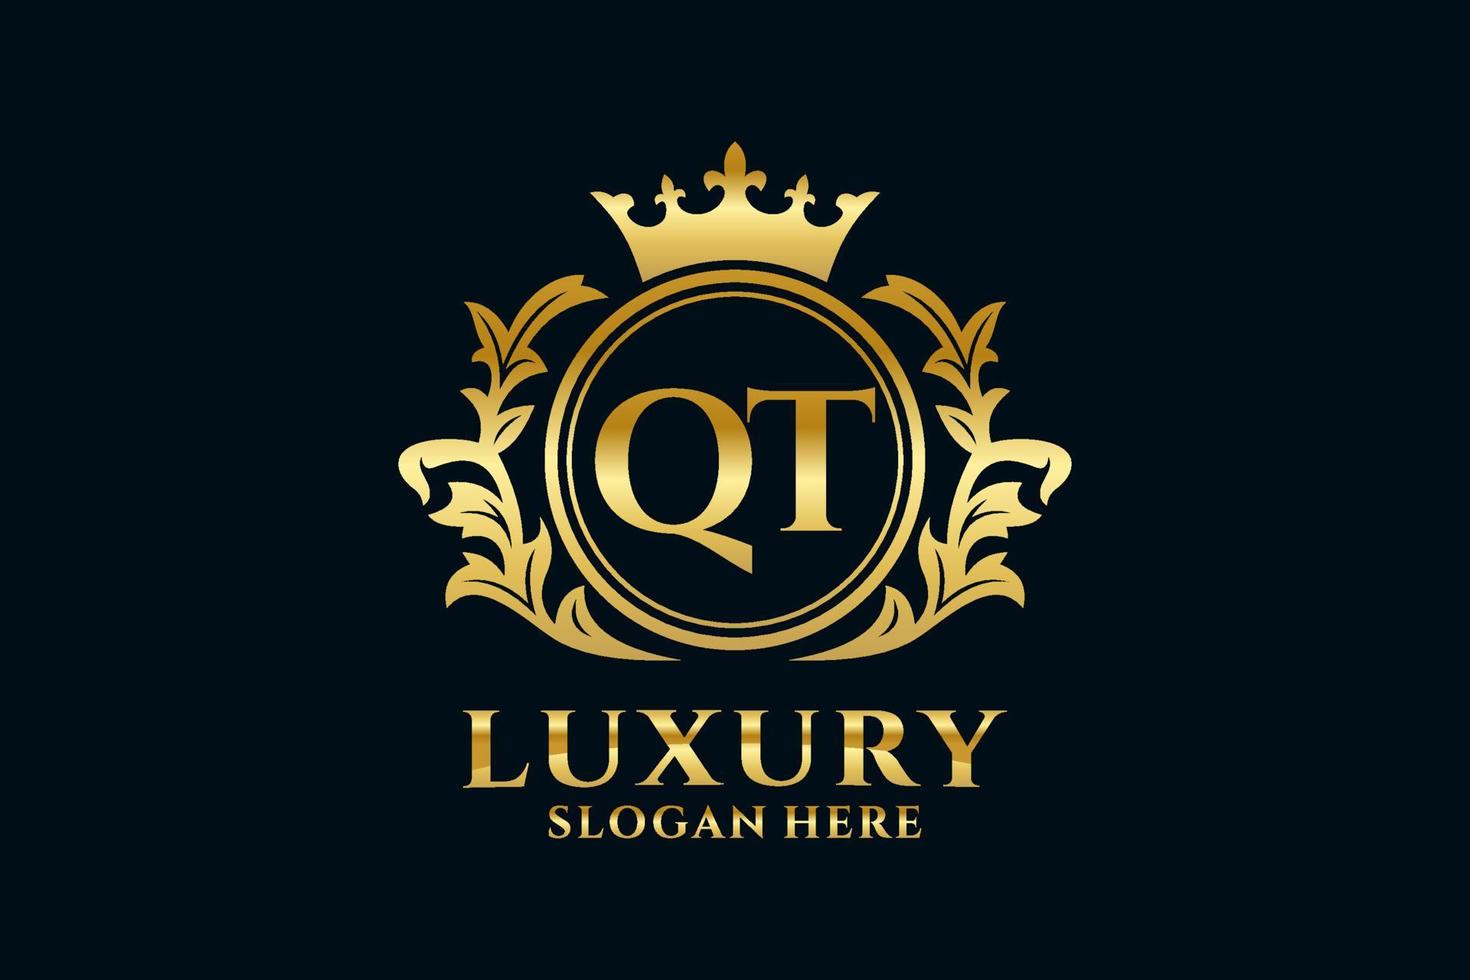 Initial QT Letter Royal Luxury Logo template in vector art for luxurious branding projects and other vector illustration.